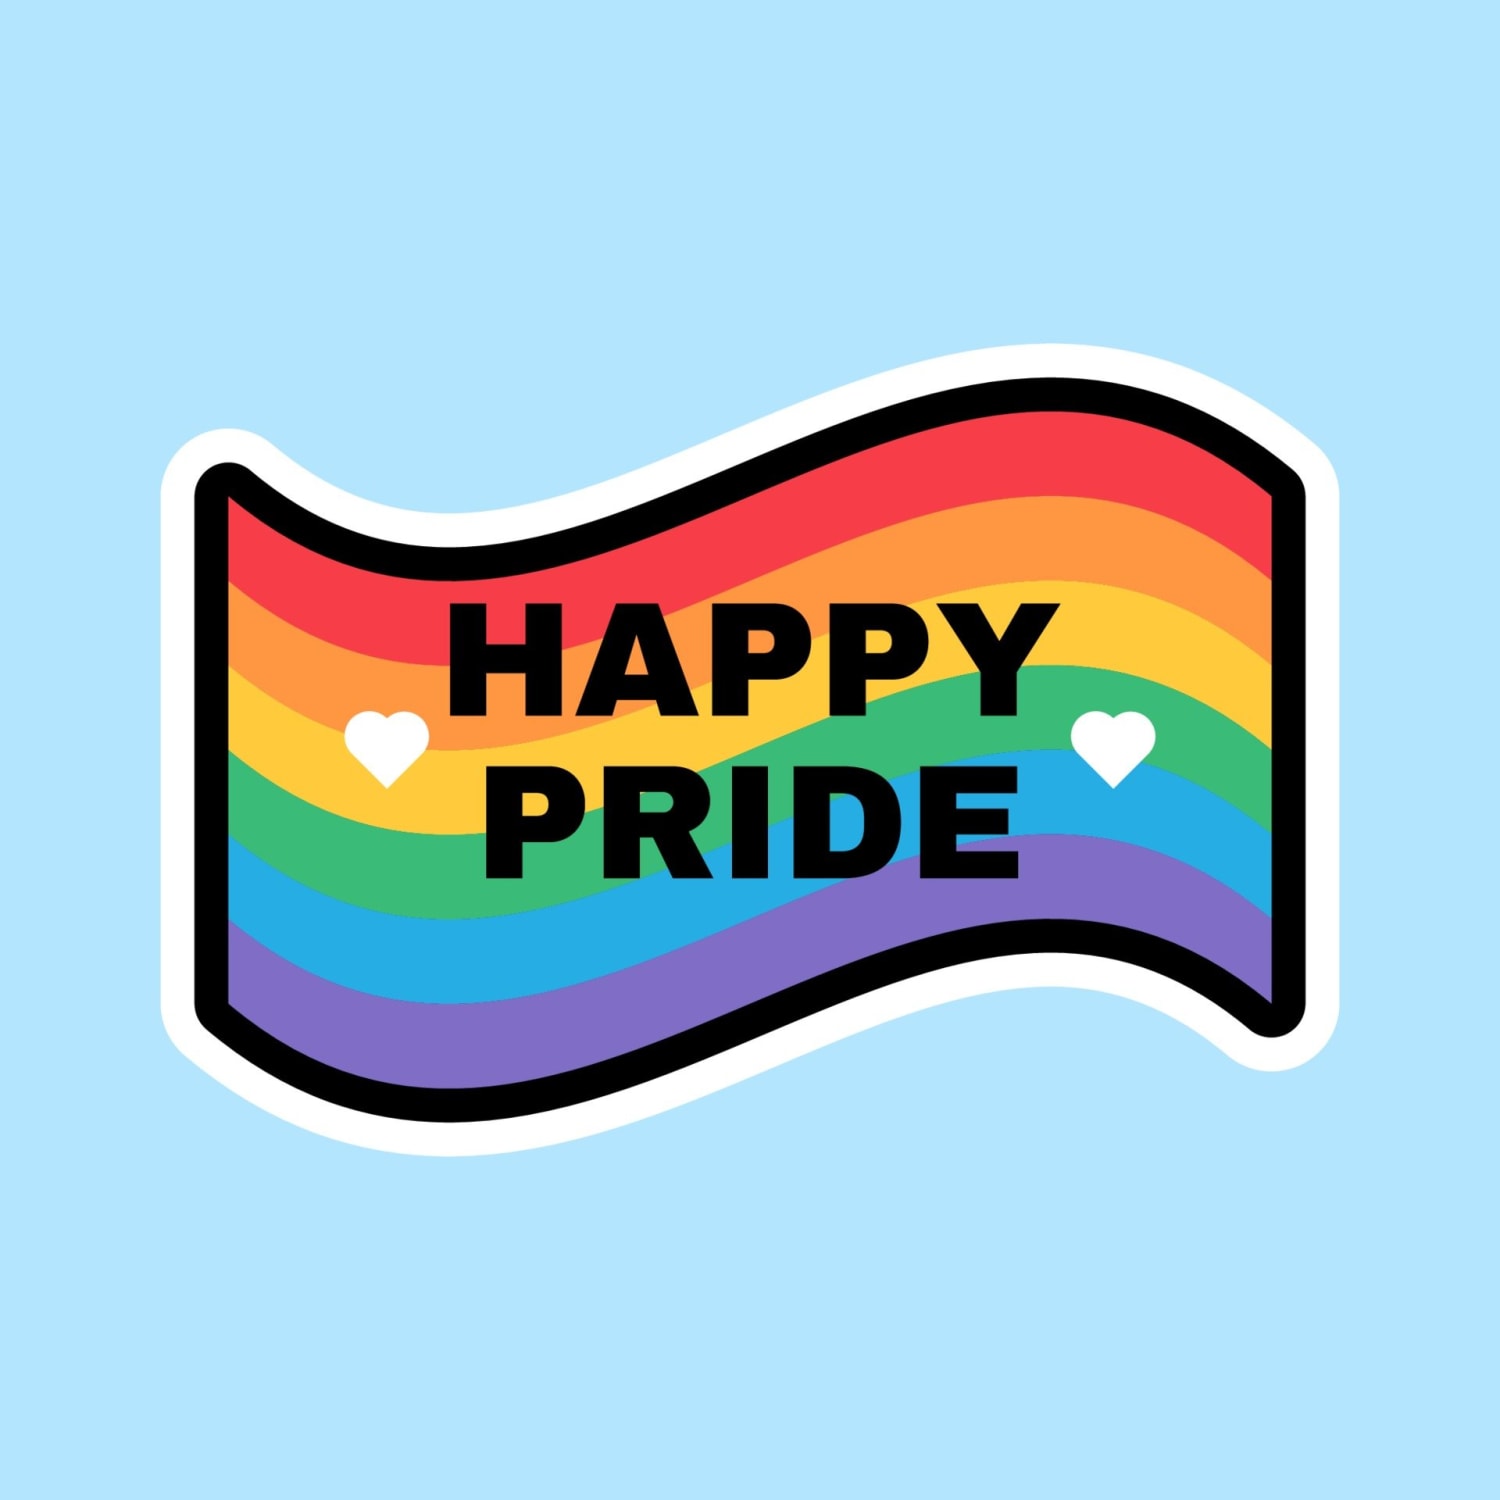 Happy pride month everyone! Its a new month, a new day, and you all are unstoppable! Love you all so much and i hope you all stay safe ❤🧡💛💚💙💜🤎🖤